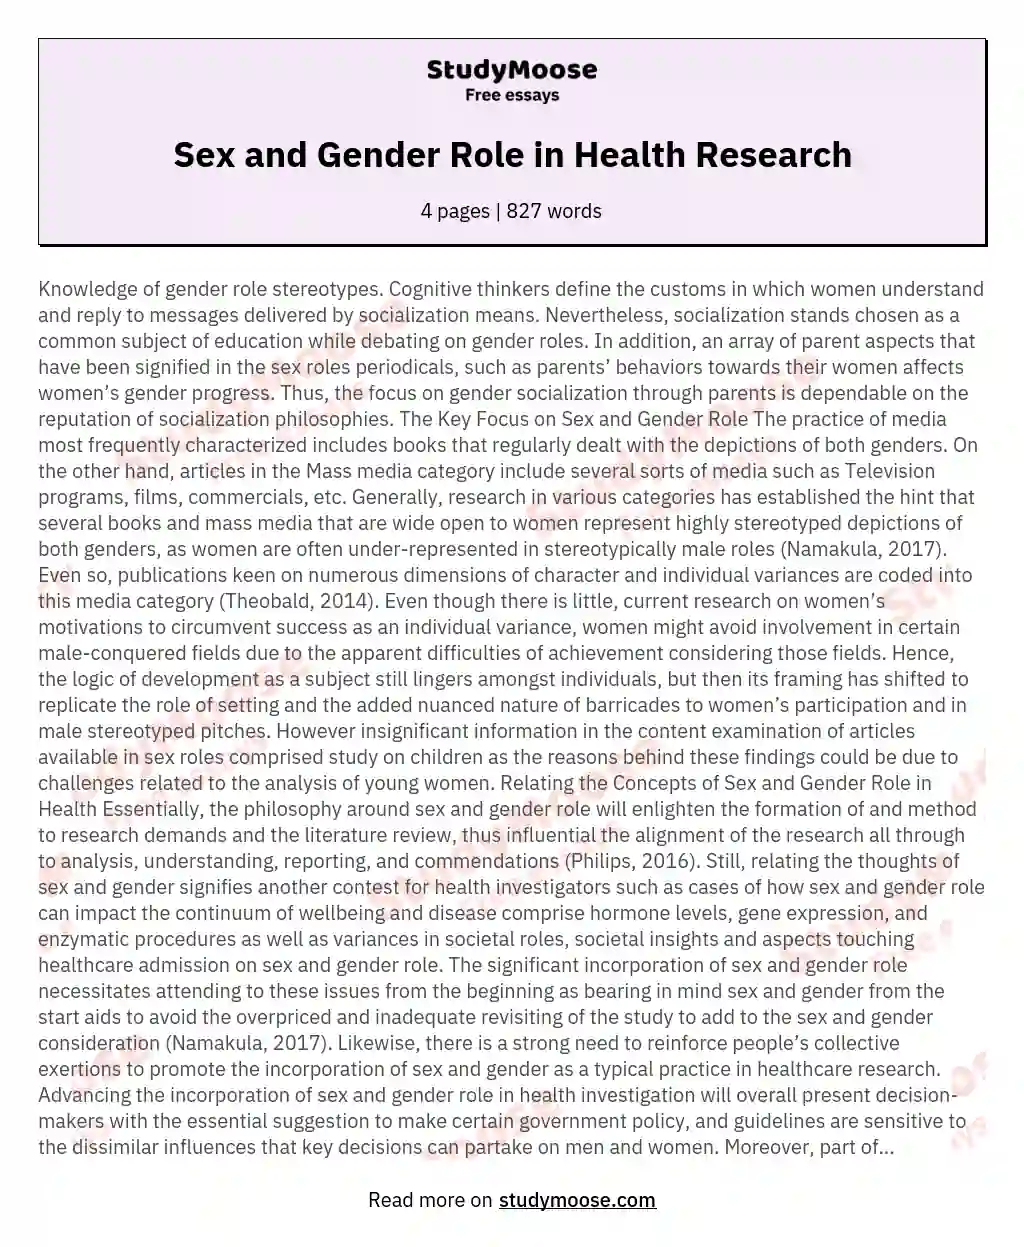 Sex and Gender Role in Health Research essay